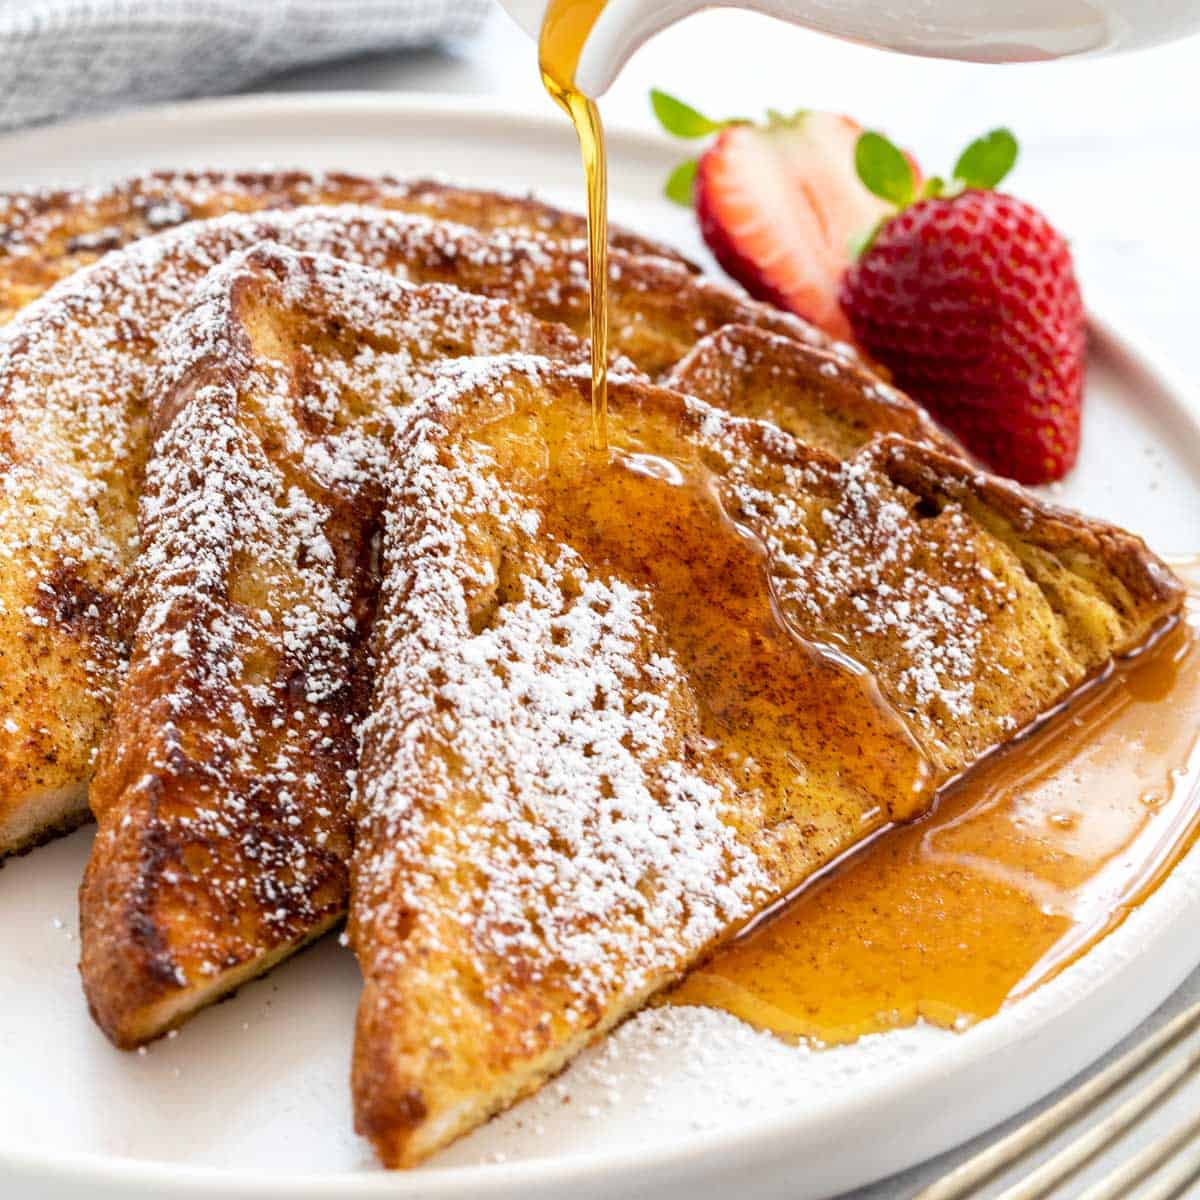 How to Make French Toast: A Delicious Breakfast Recipe